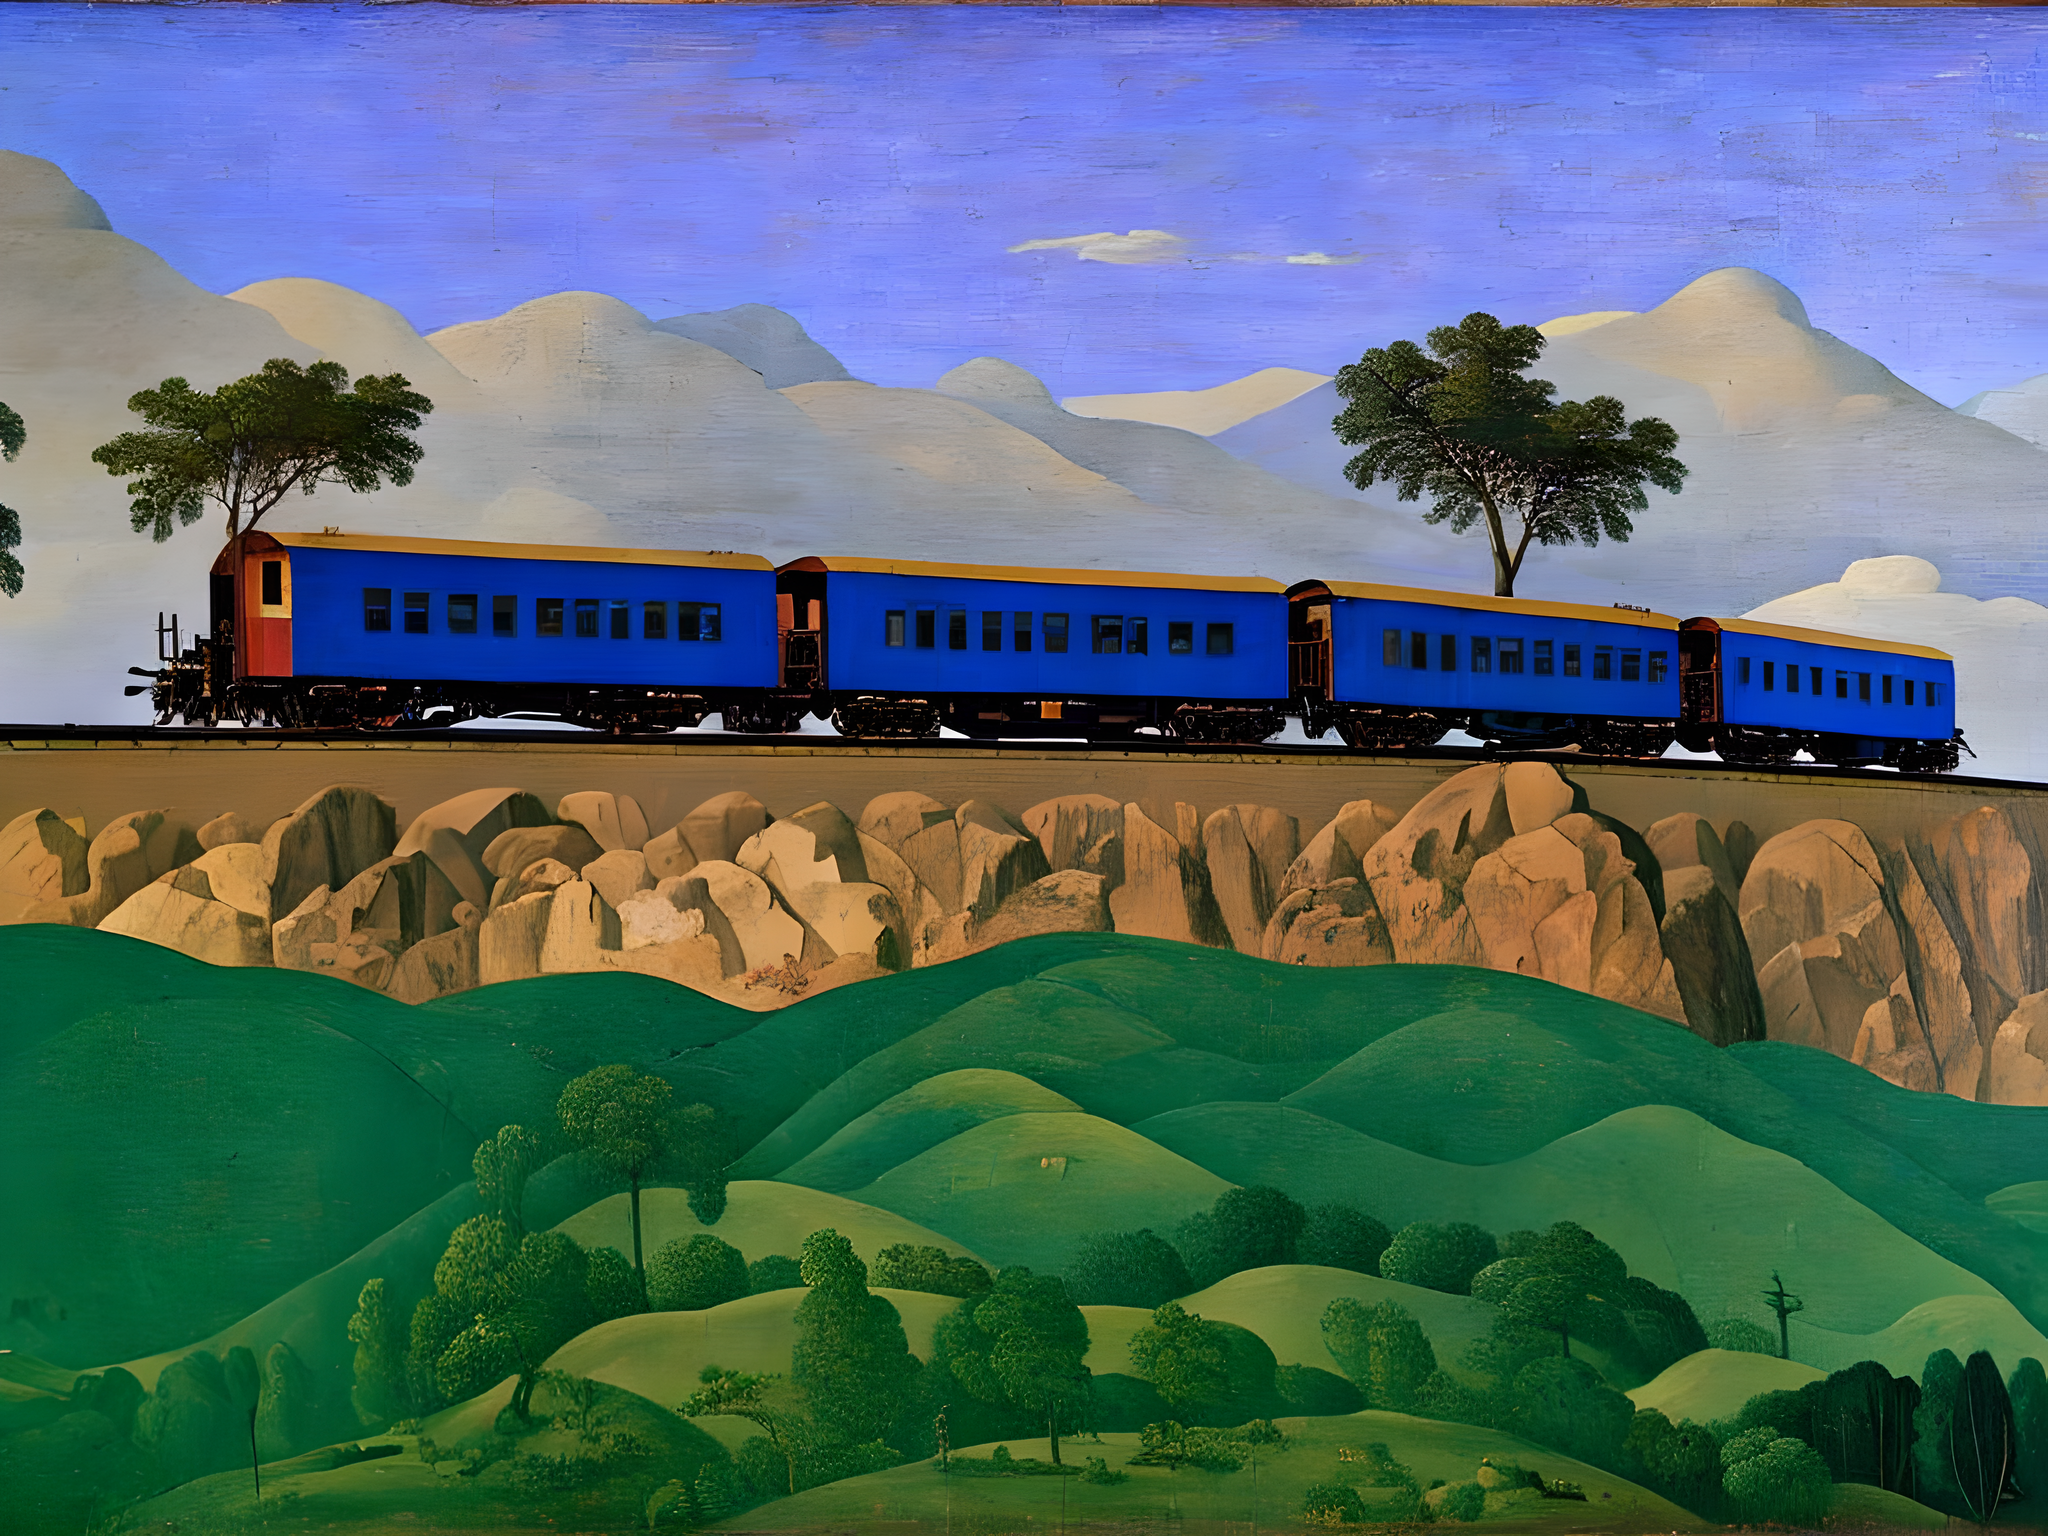 Painting of a train